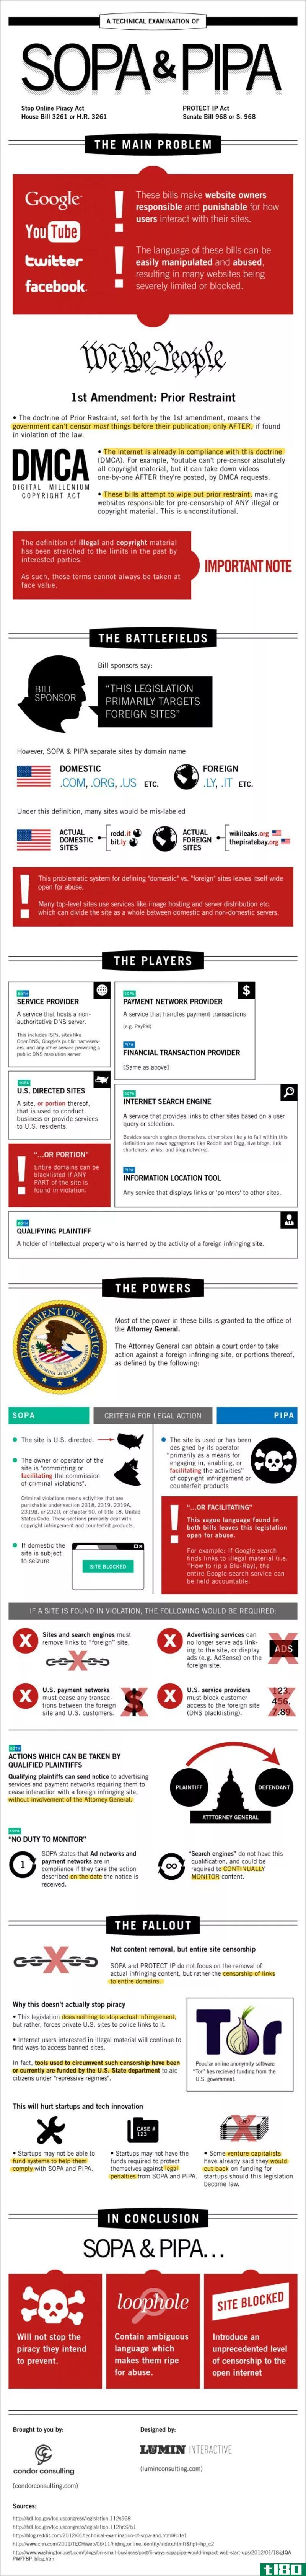 Illustration for article titled SOPA and PIPA Technical Issues Explained Simply in Infographic Form